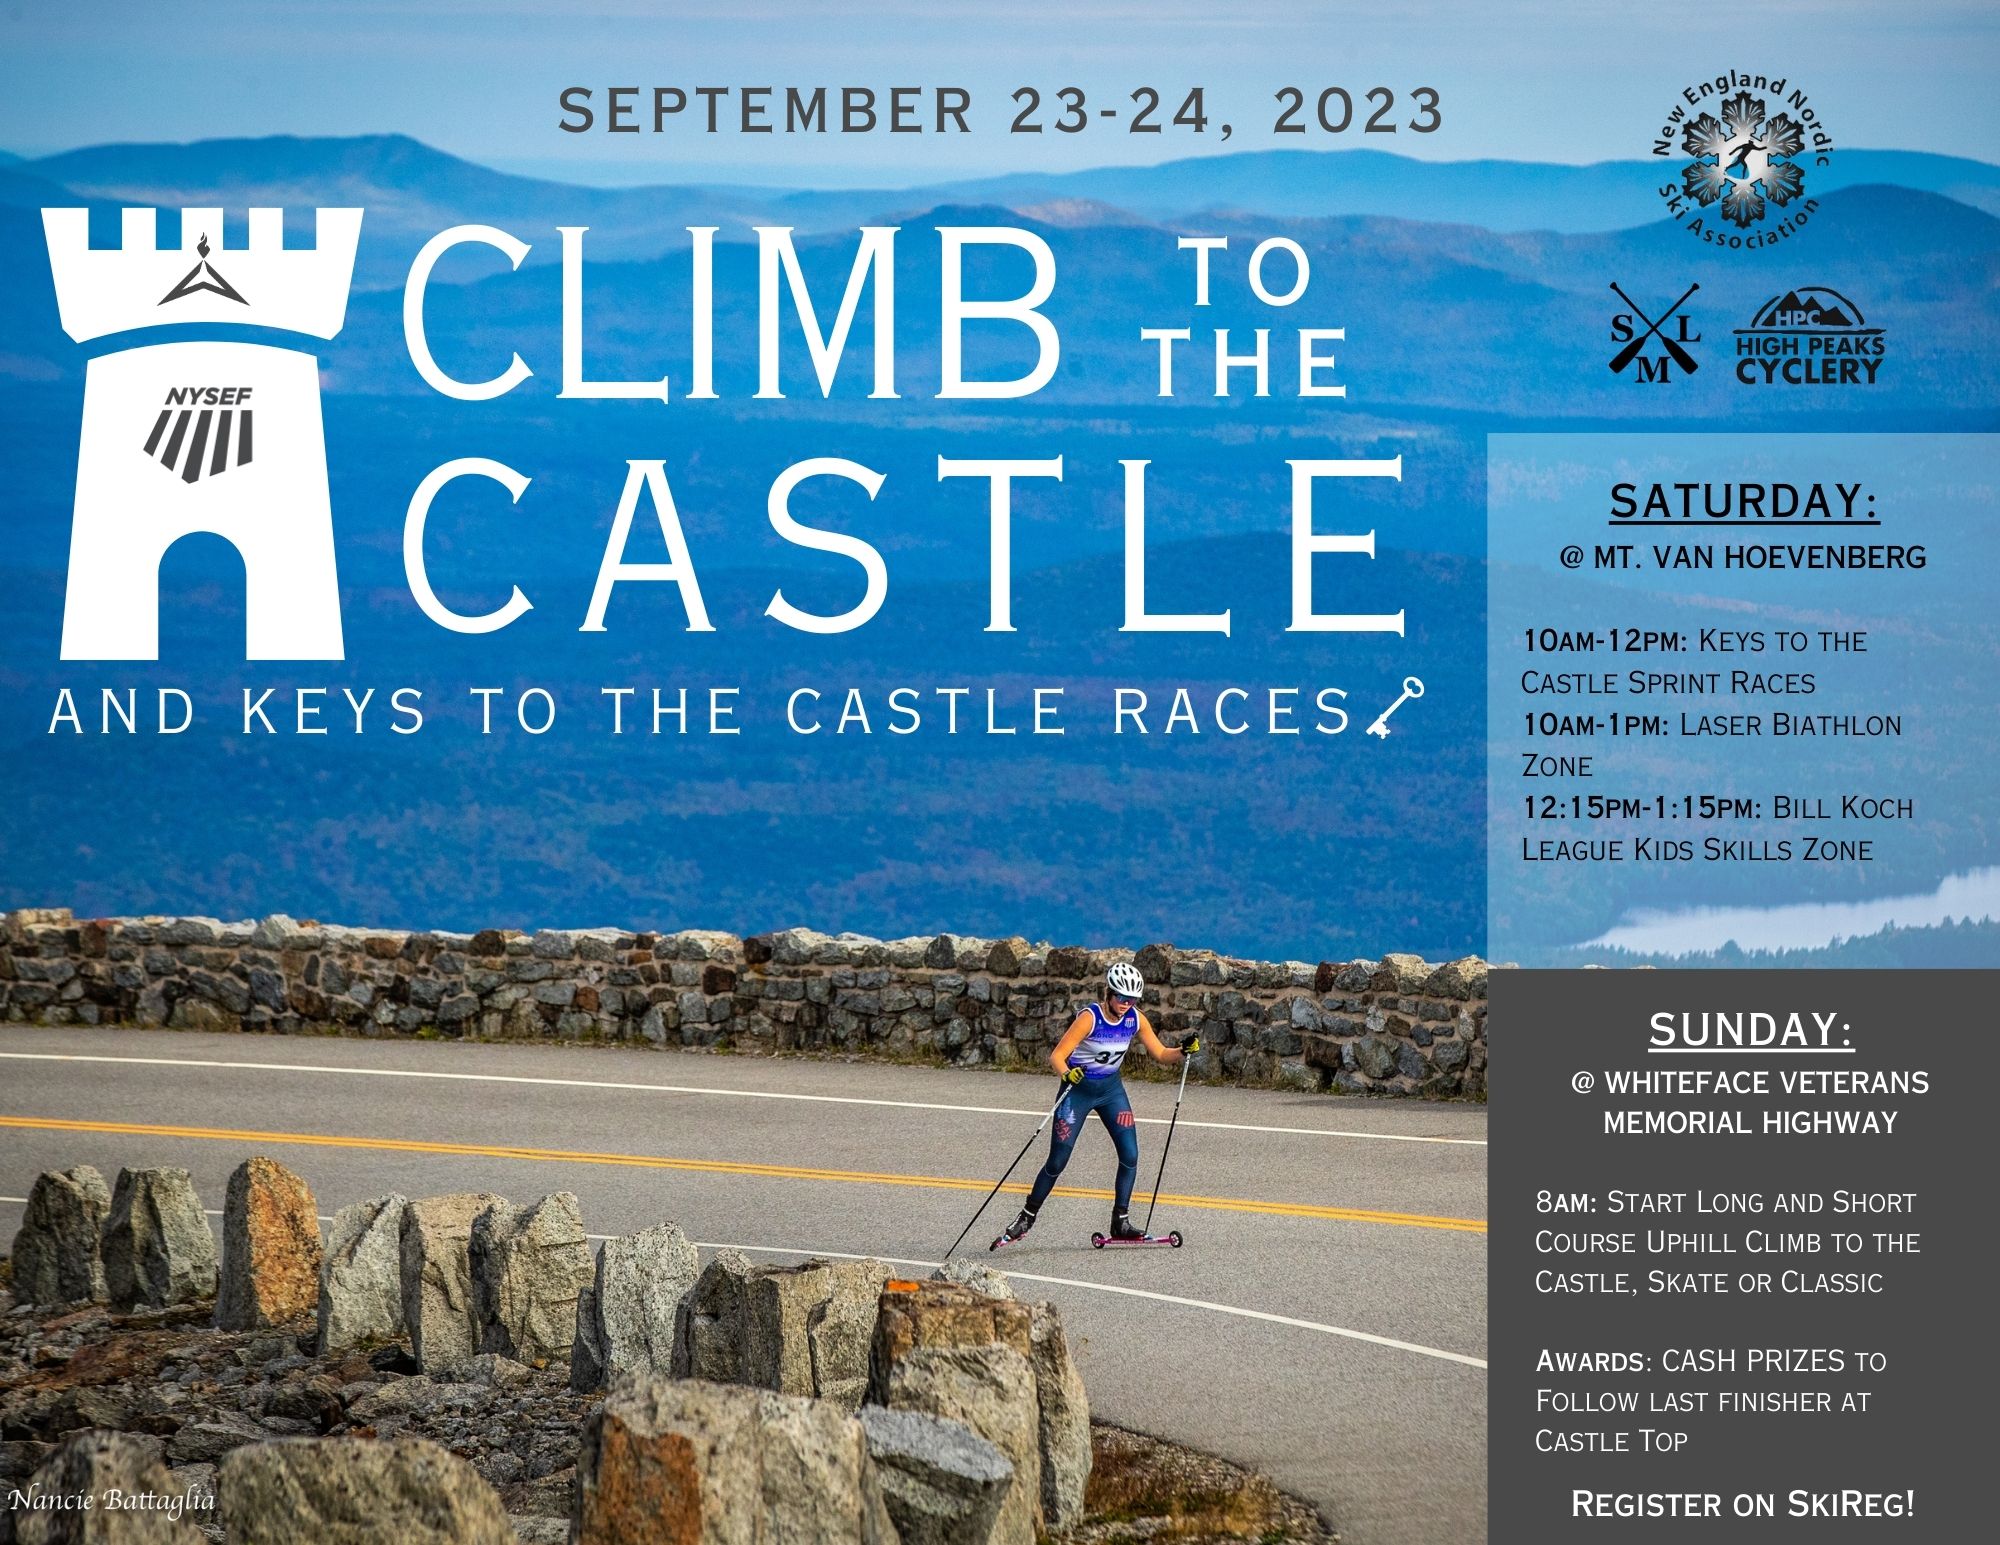 Climb to the Castle rollerski race